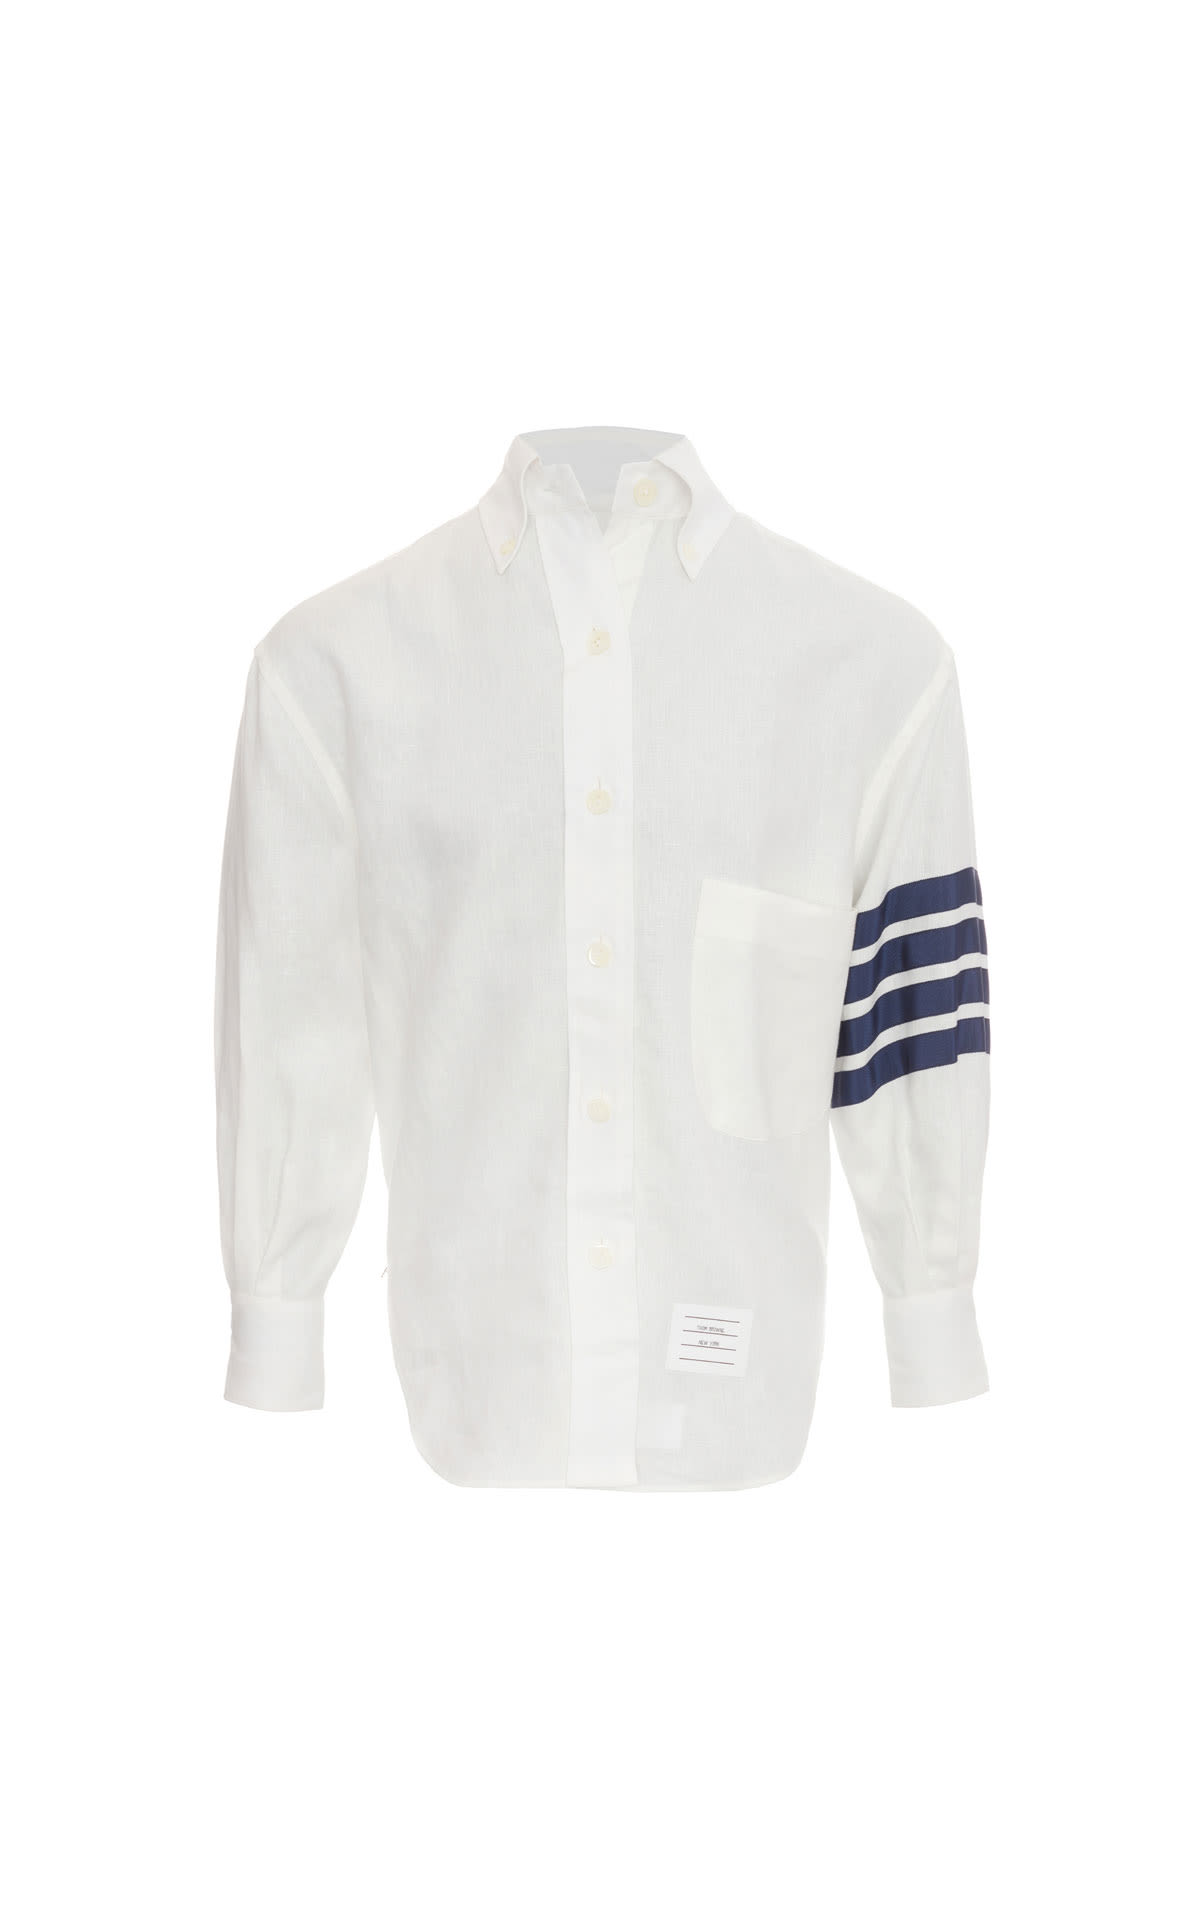 Thom Browne Supersized grosgrain shirt  from Bicester Village